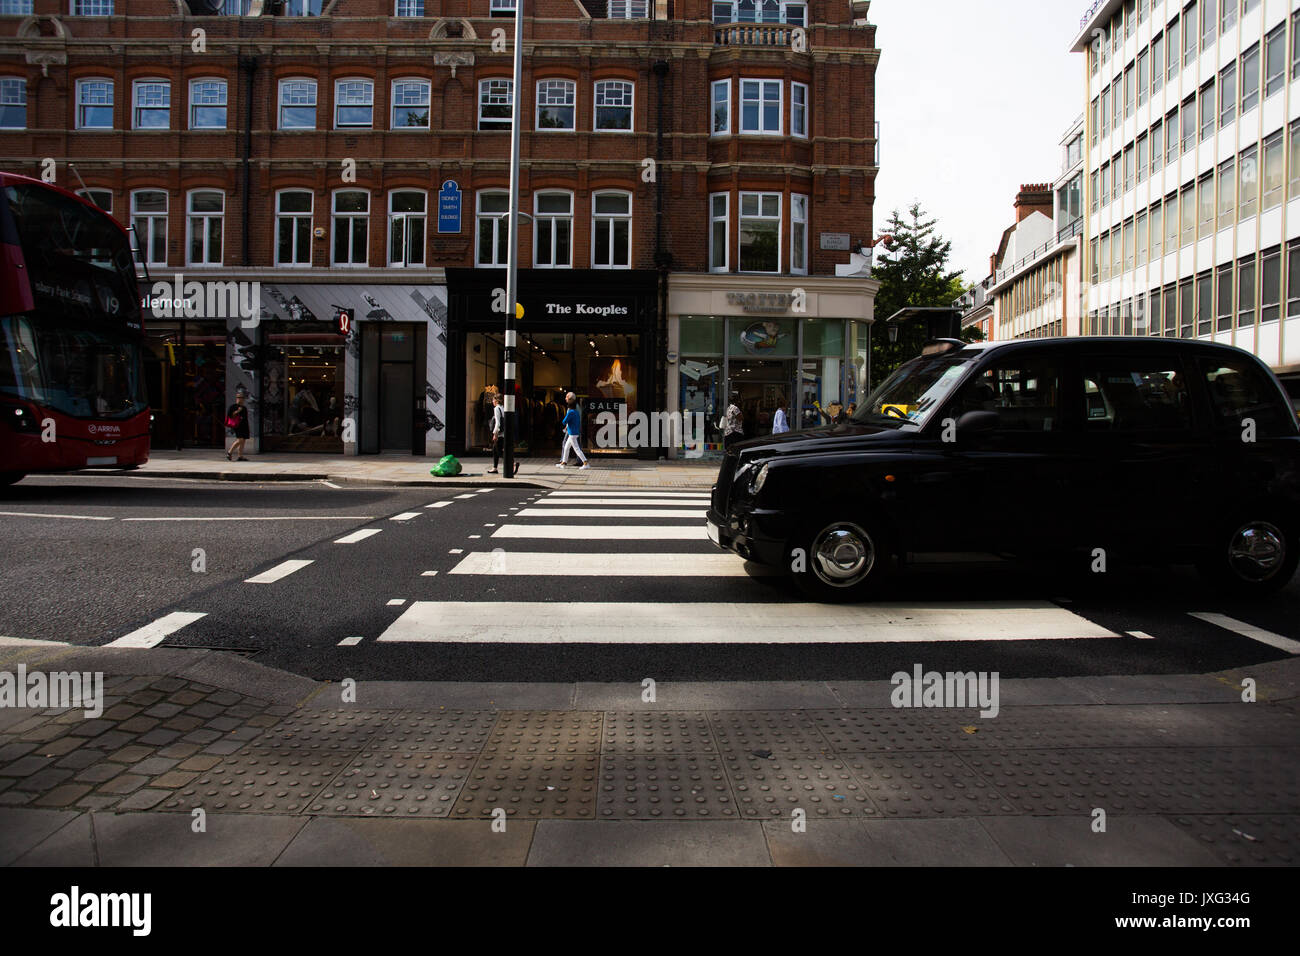 A Zebra Crossing with black London Taxi Cab on Zebra Crossing and London bus coming in from left on Kings Street, Sloane Square, London. Stock Photo